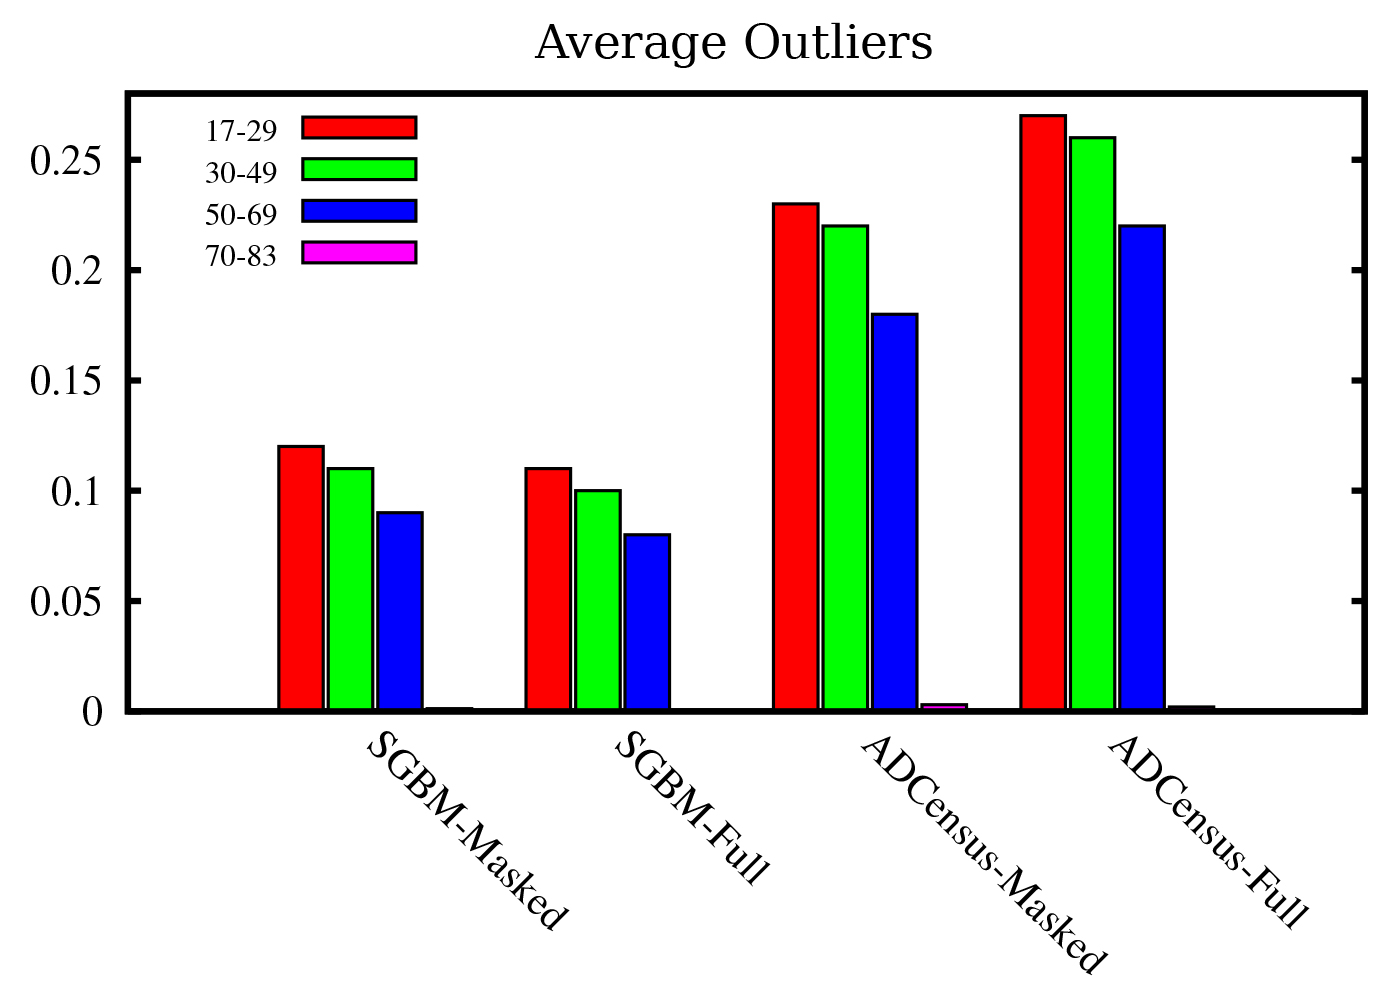 Average outliers for both SGBM and ADCensusB